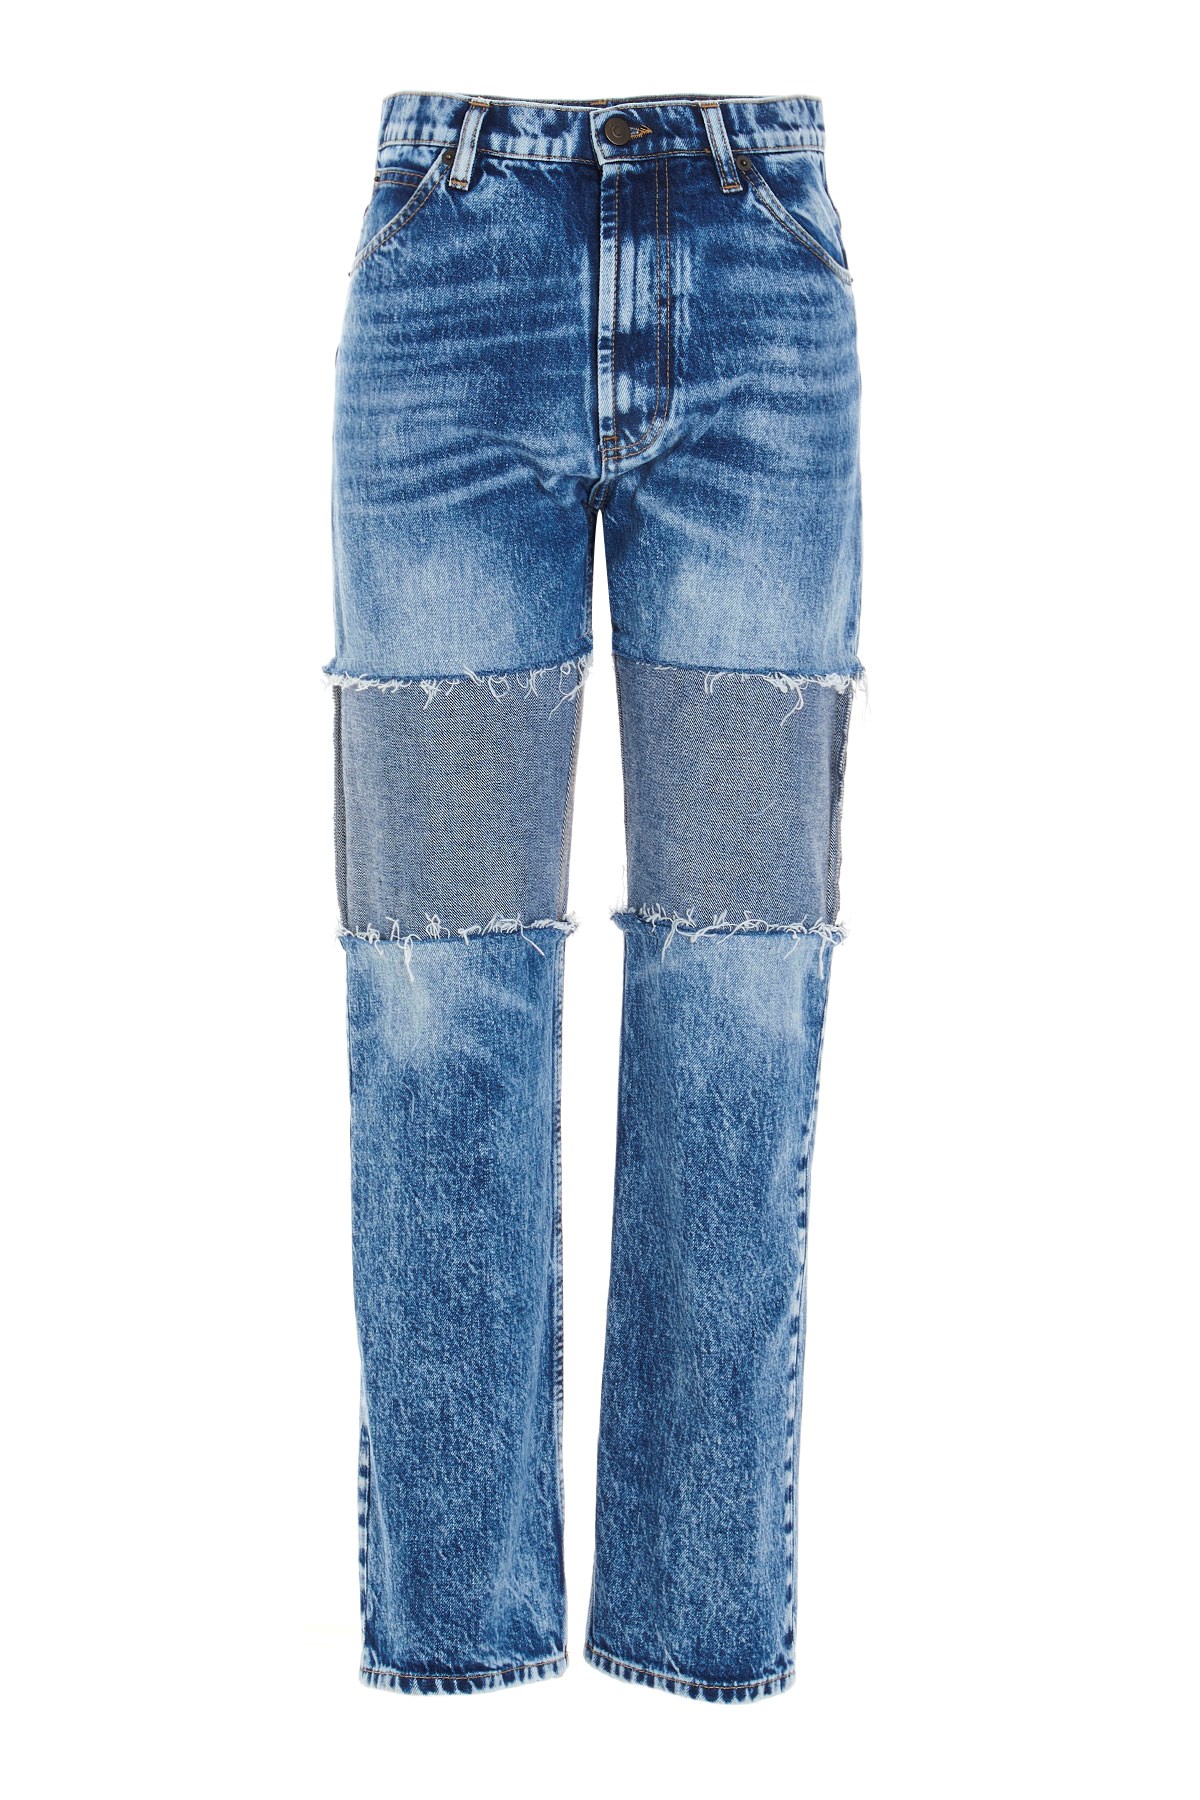 MAISON MARGIELA 'Recycled Patchwork' Jeans